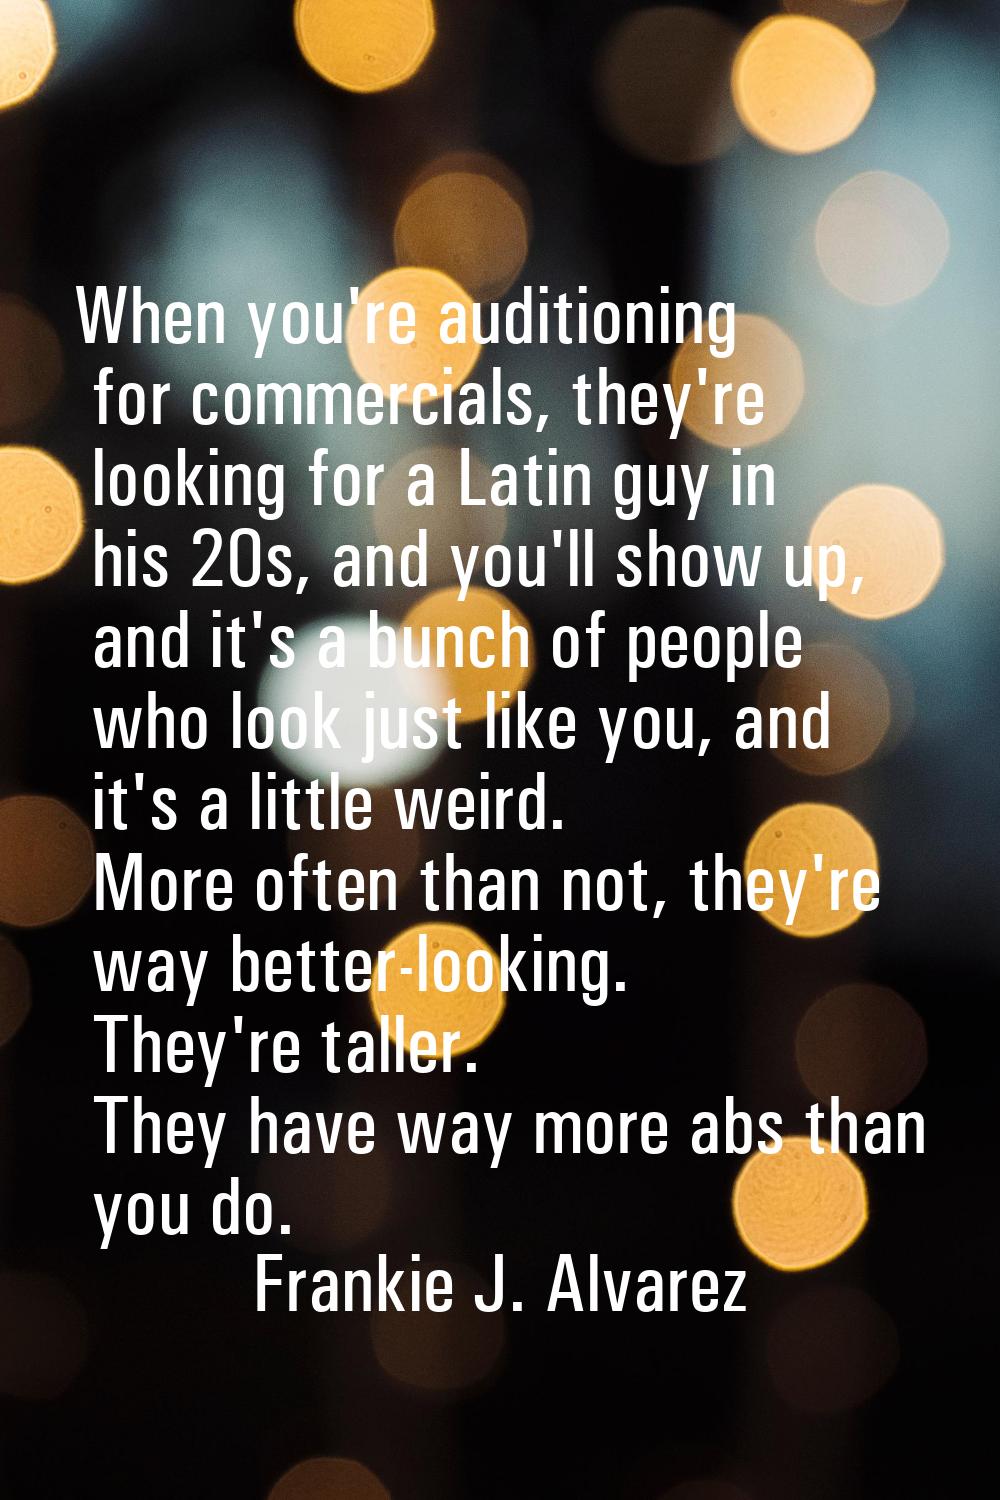 When you're auditioning for commercials, they're looking for a Latin guy in his 20s, and you'll sho